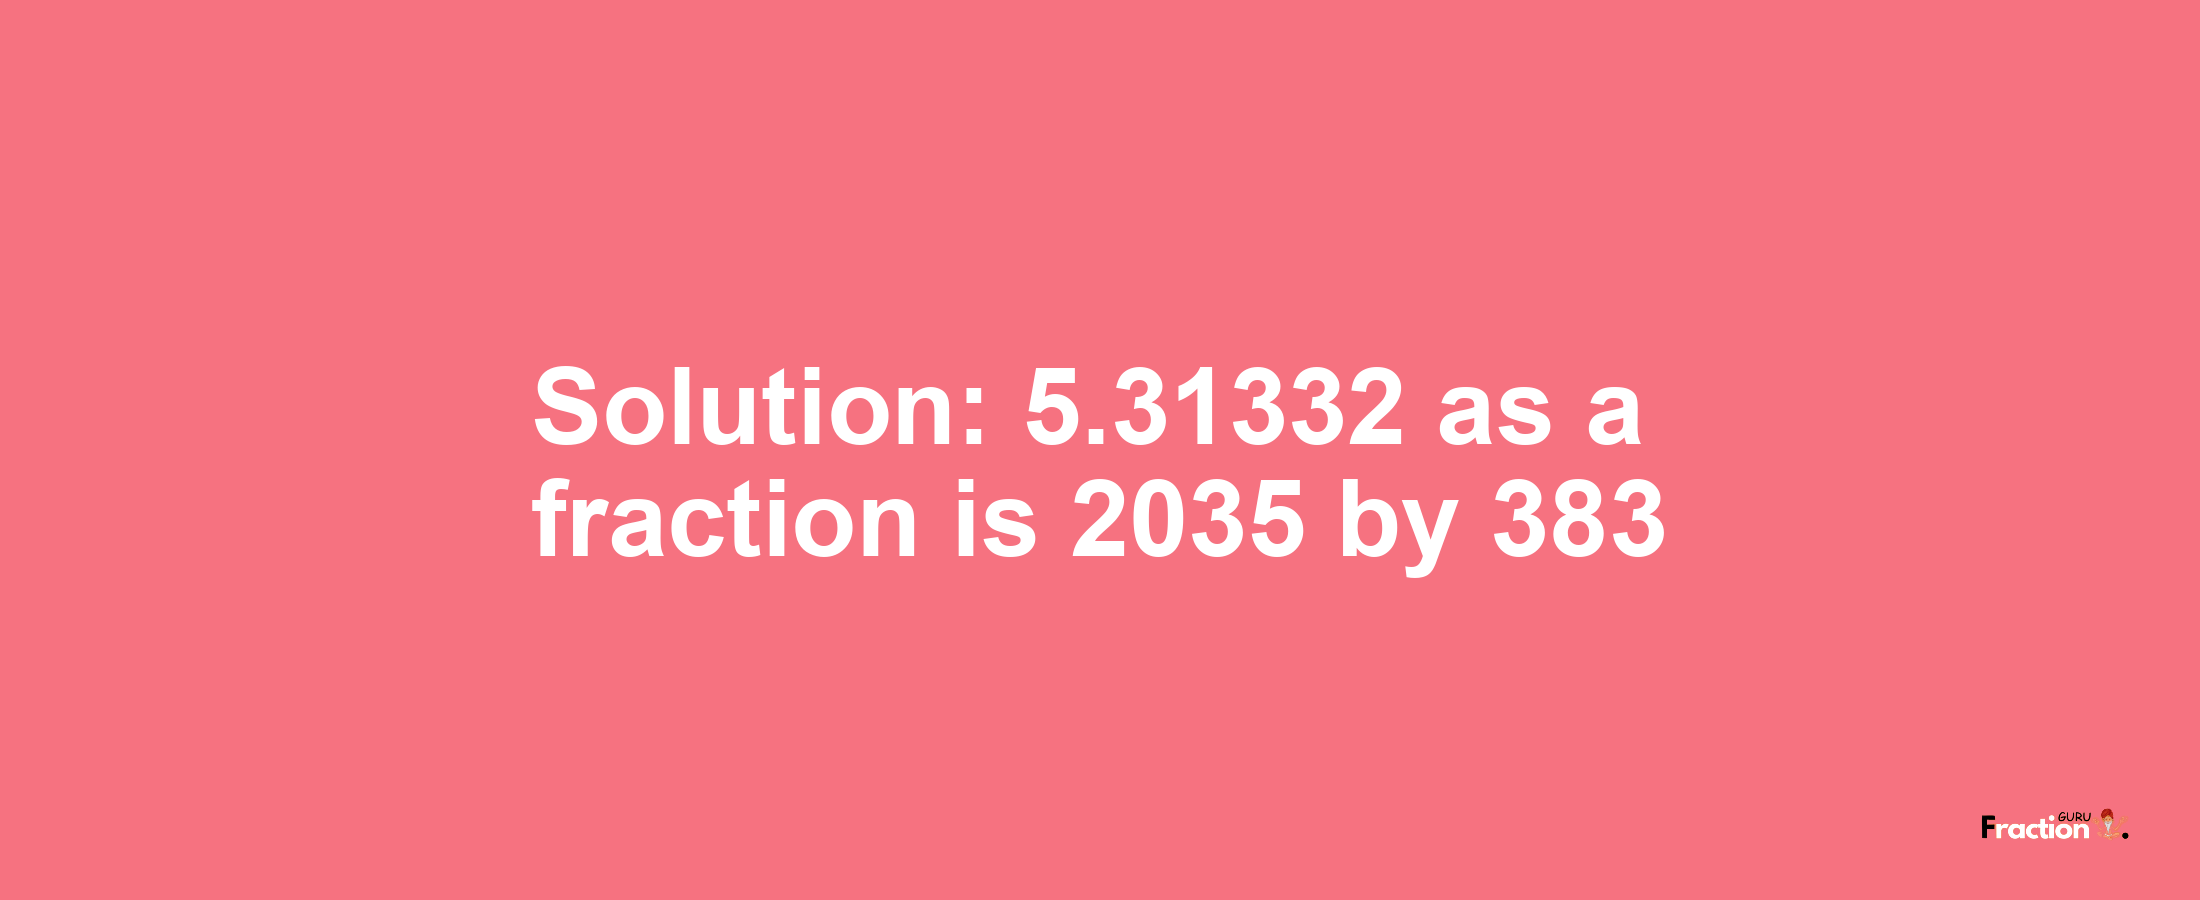 Solution:5.31332 as a fraction is 2035/383